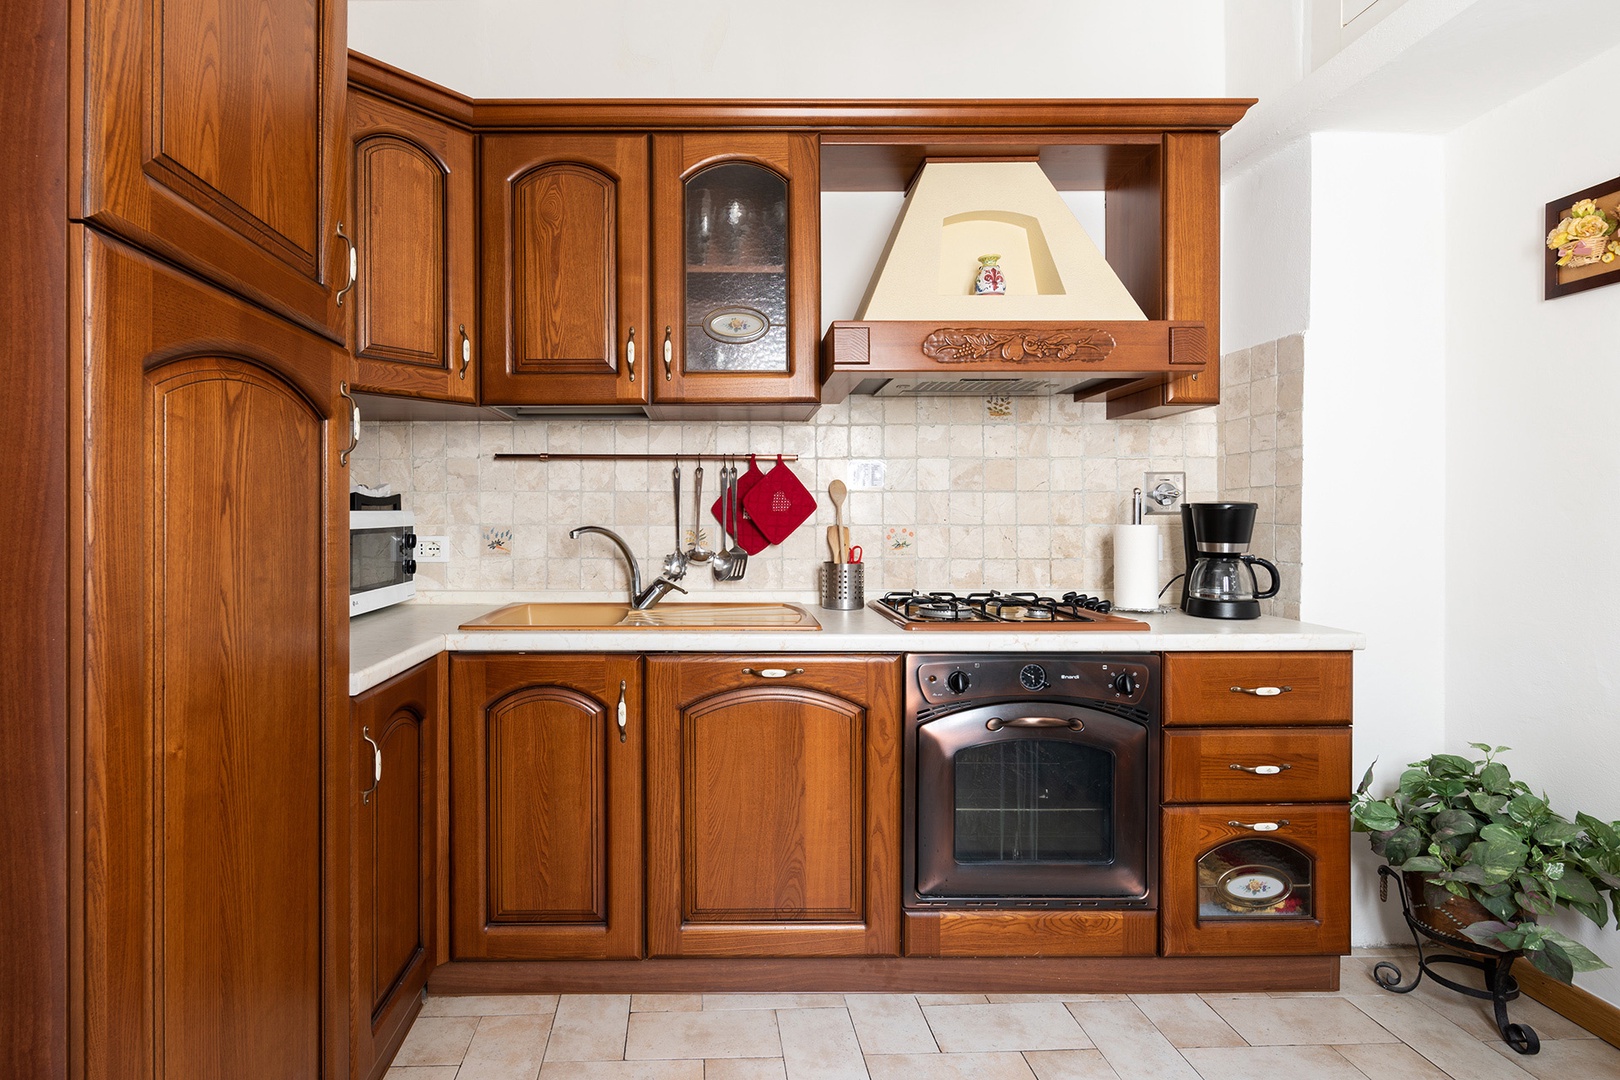 Large kitchen will make you want to try your hand at cooking at home.